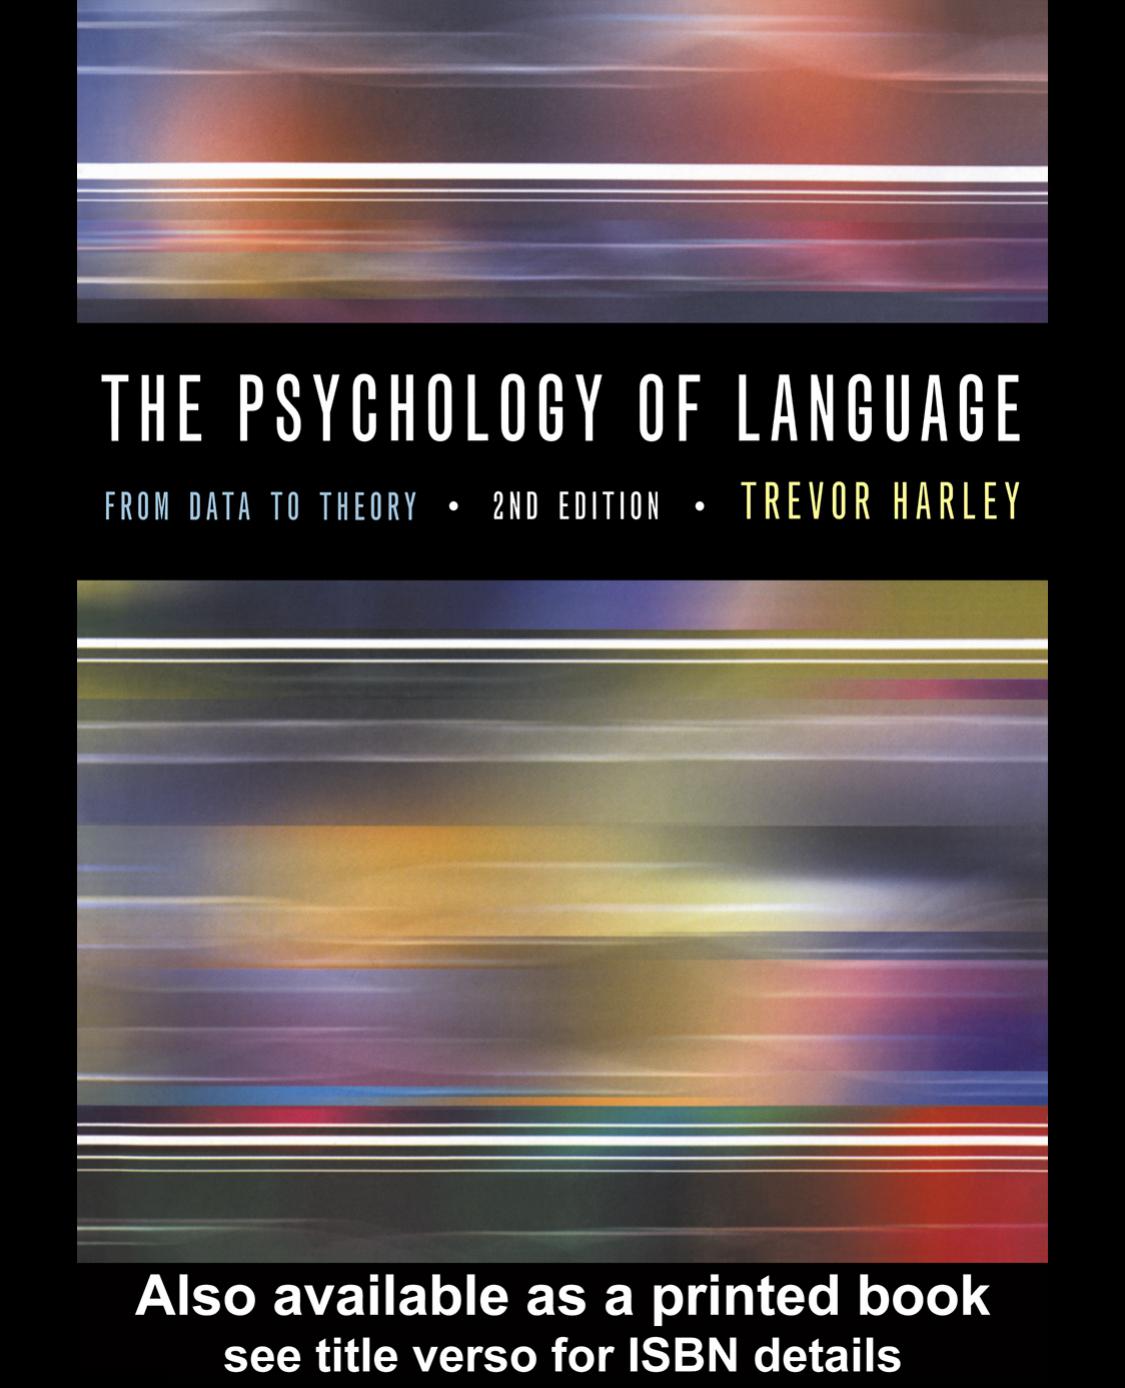 The Psychology of Language: From Data to Theory